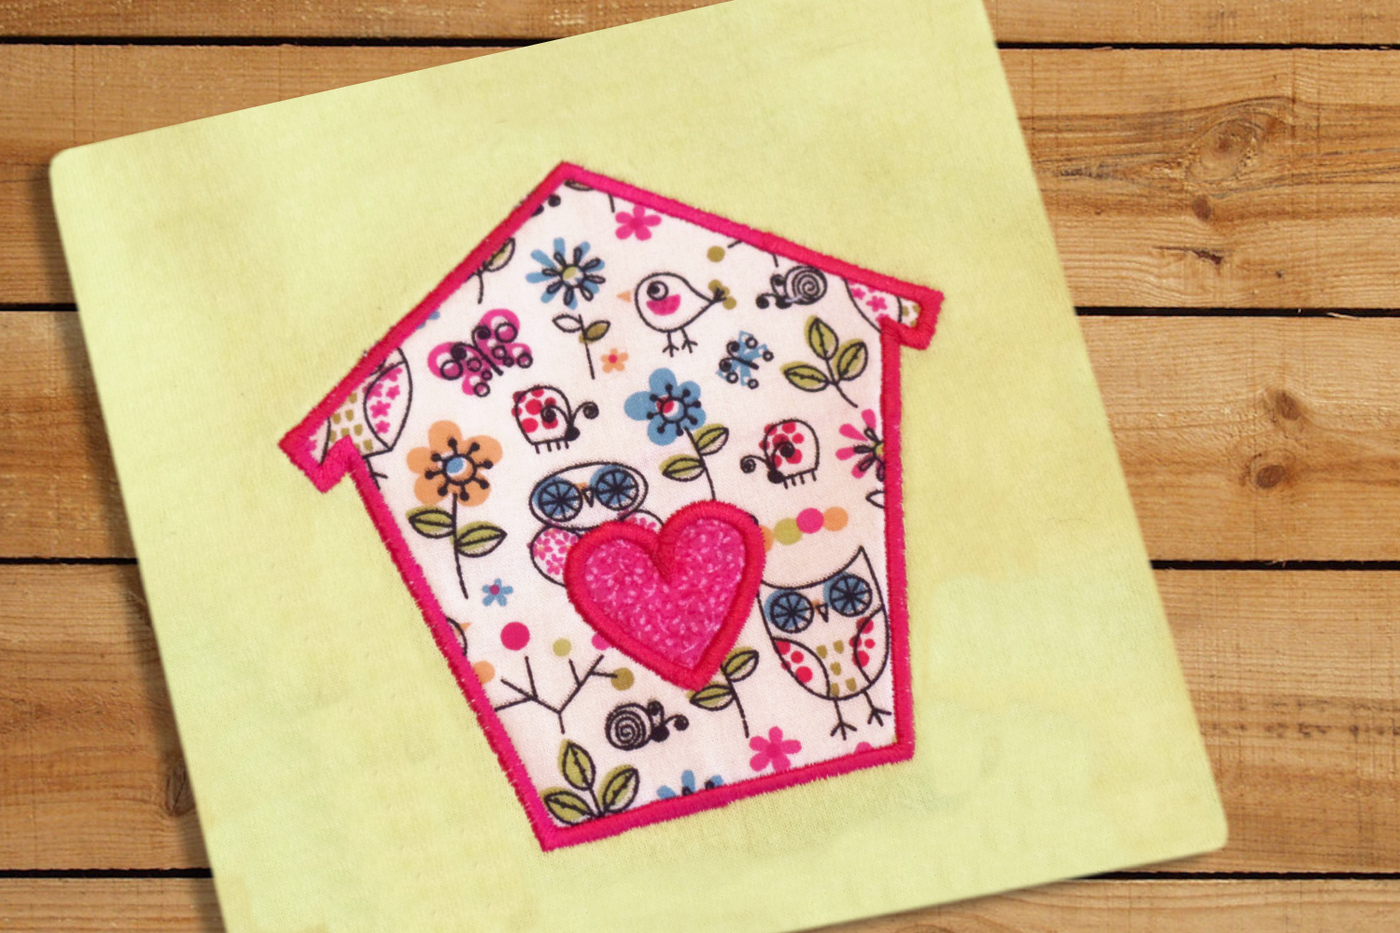 A yellow square of fabric on a wood surface. Embroidered onto the fabric is an applique birdhouse shape with a heart in the middle. The applique fabric features stylized birds.